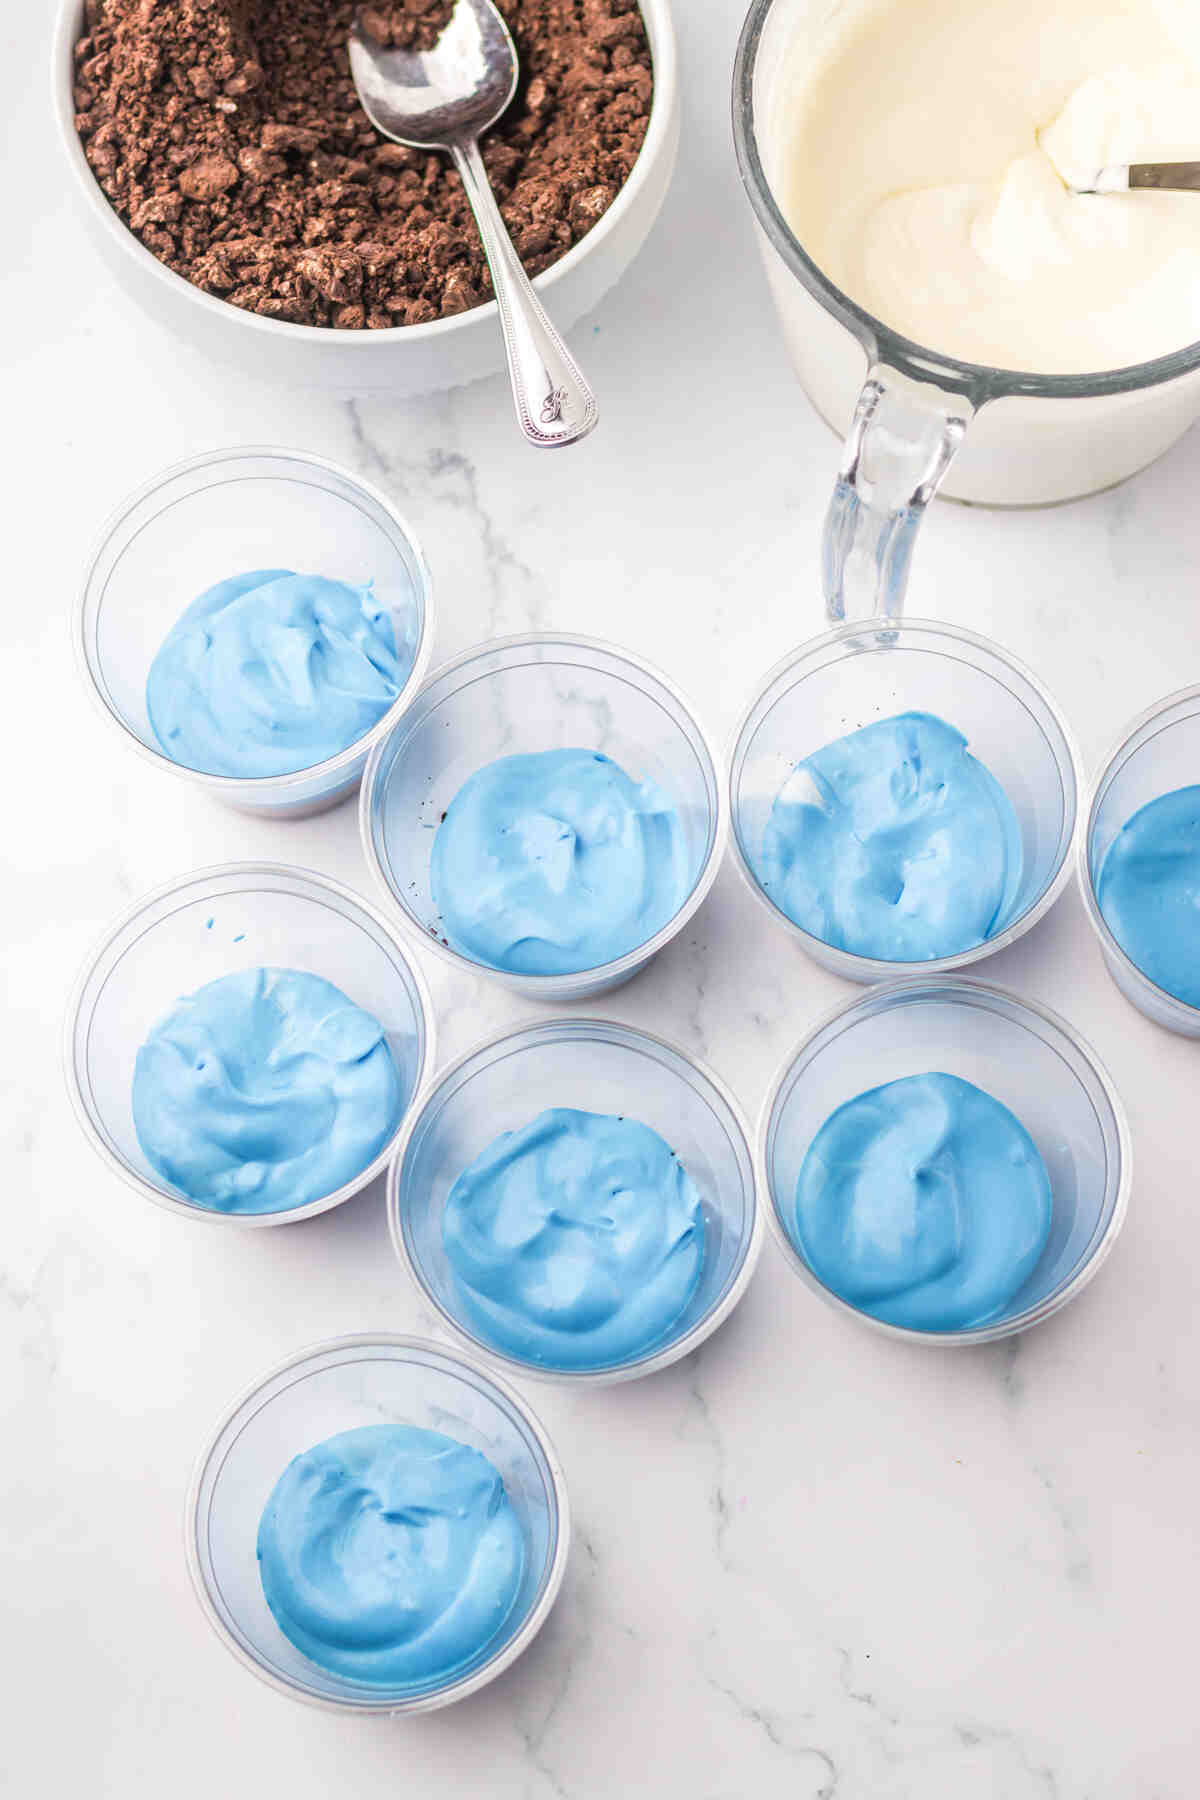 blue pudding being layered on top of cookie crumbs inside individual serving dishes.